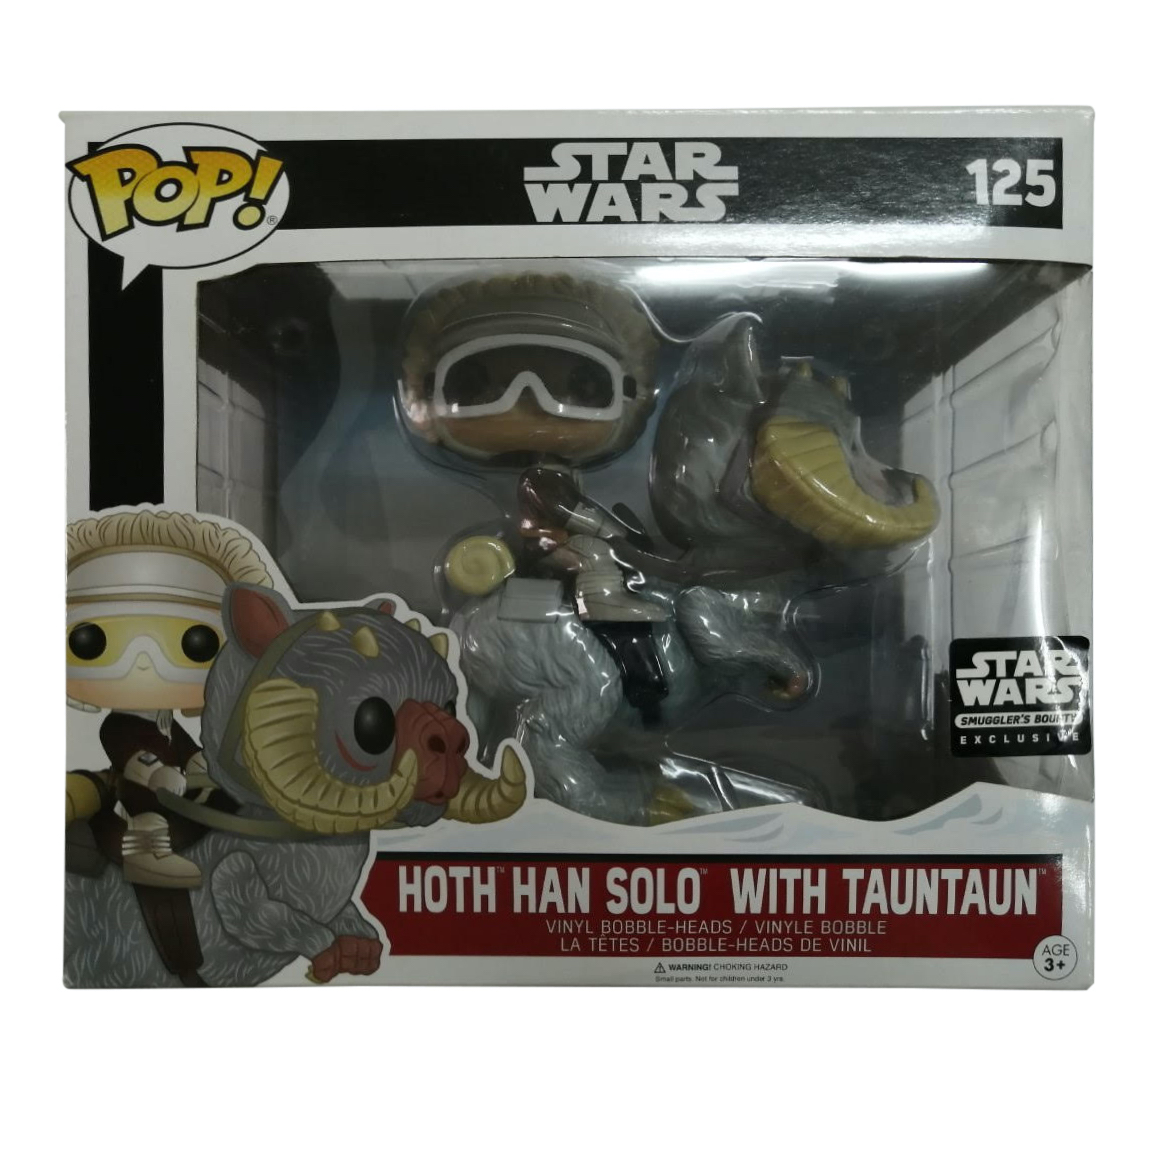 PROTECTOR SPECIAL POP "HOTH HAN SOLO WITH TAUNTAUN" PROTECTION Vinyl Case Box 